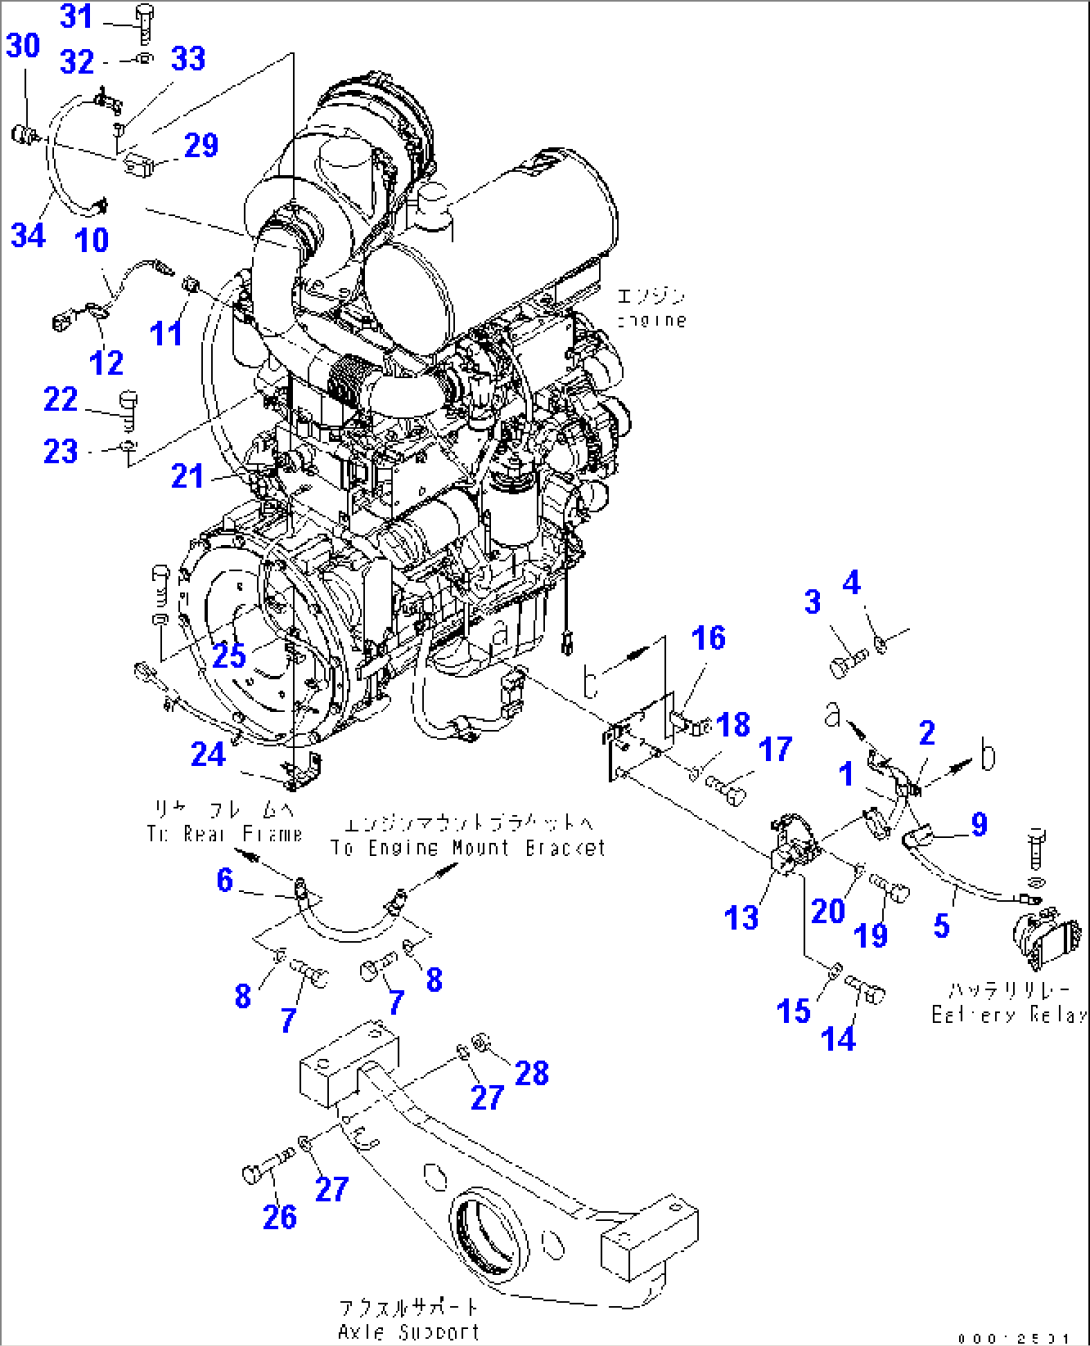 ENGINE HARNESS (2/2) (STARTER HARNESS AND SENSOR) (FOR AIR CONDITIONER)